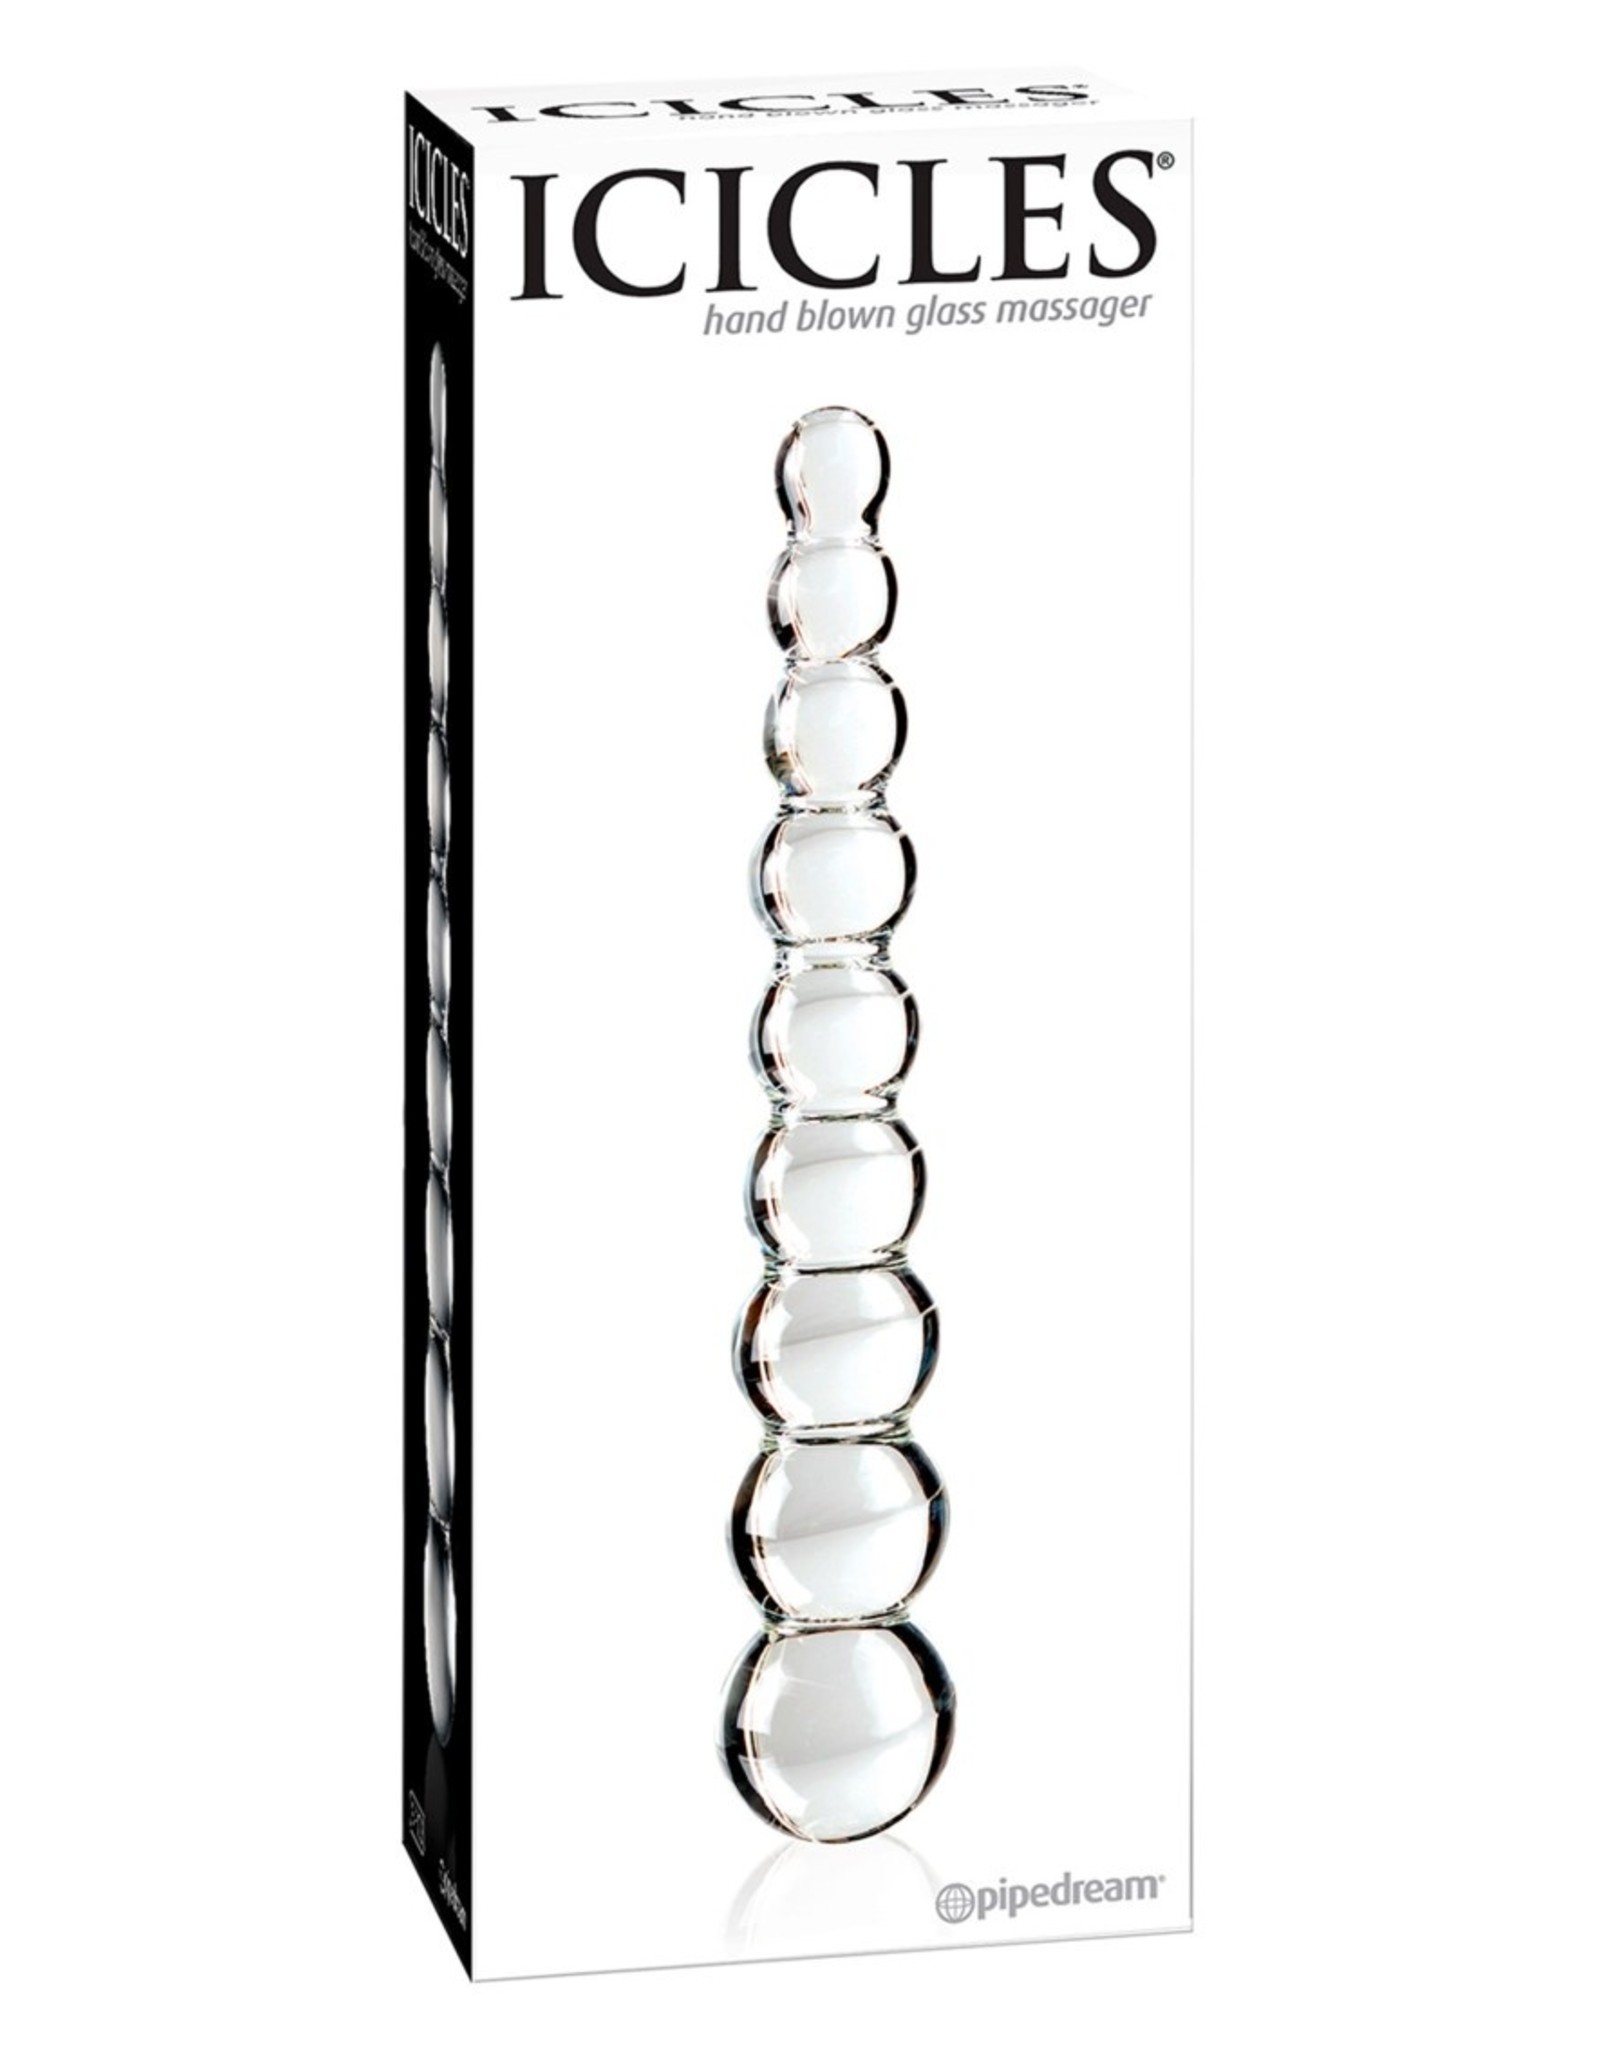 Icicles Icicles No02 Glass Massager